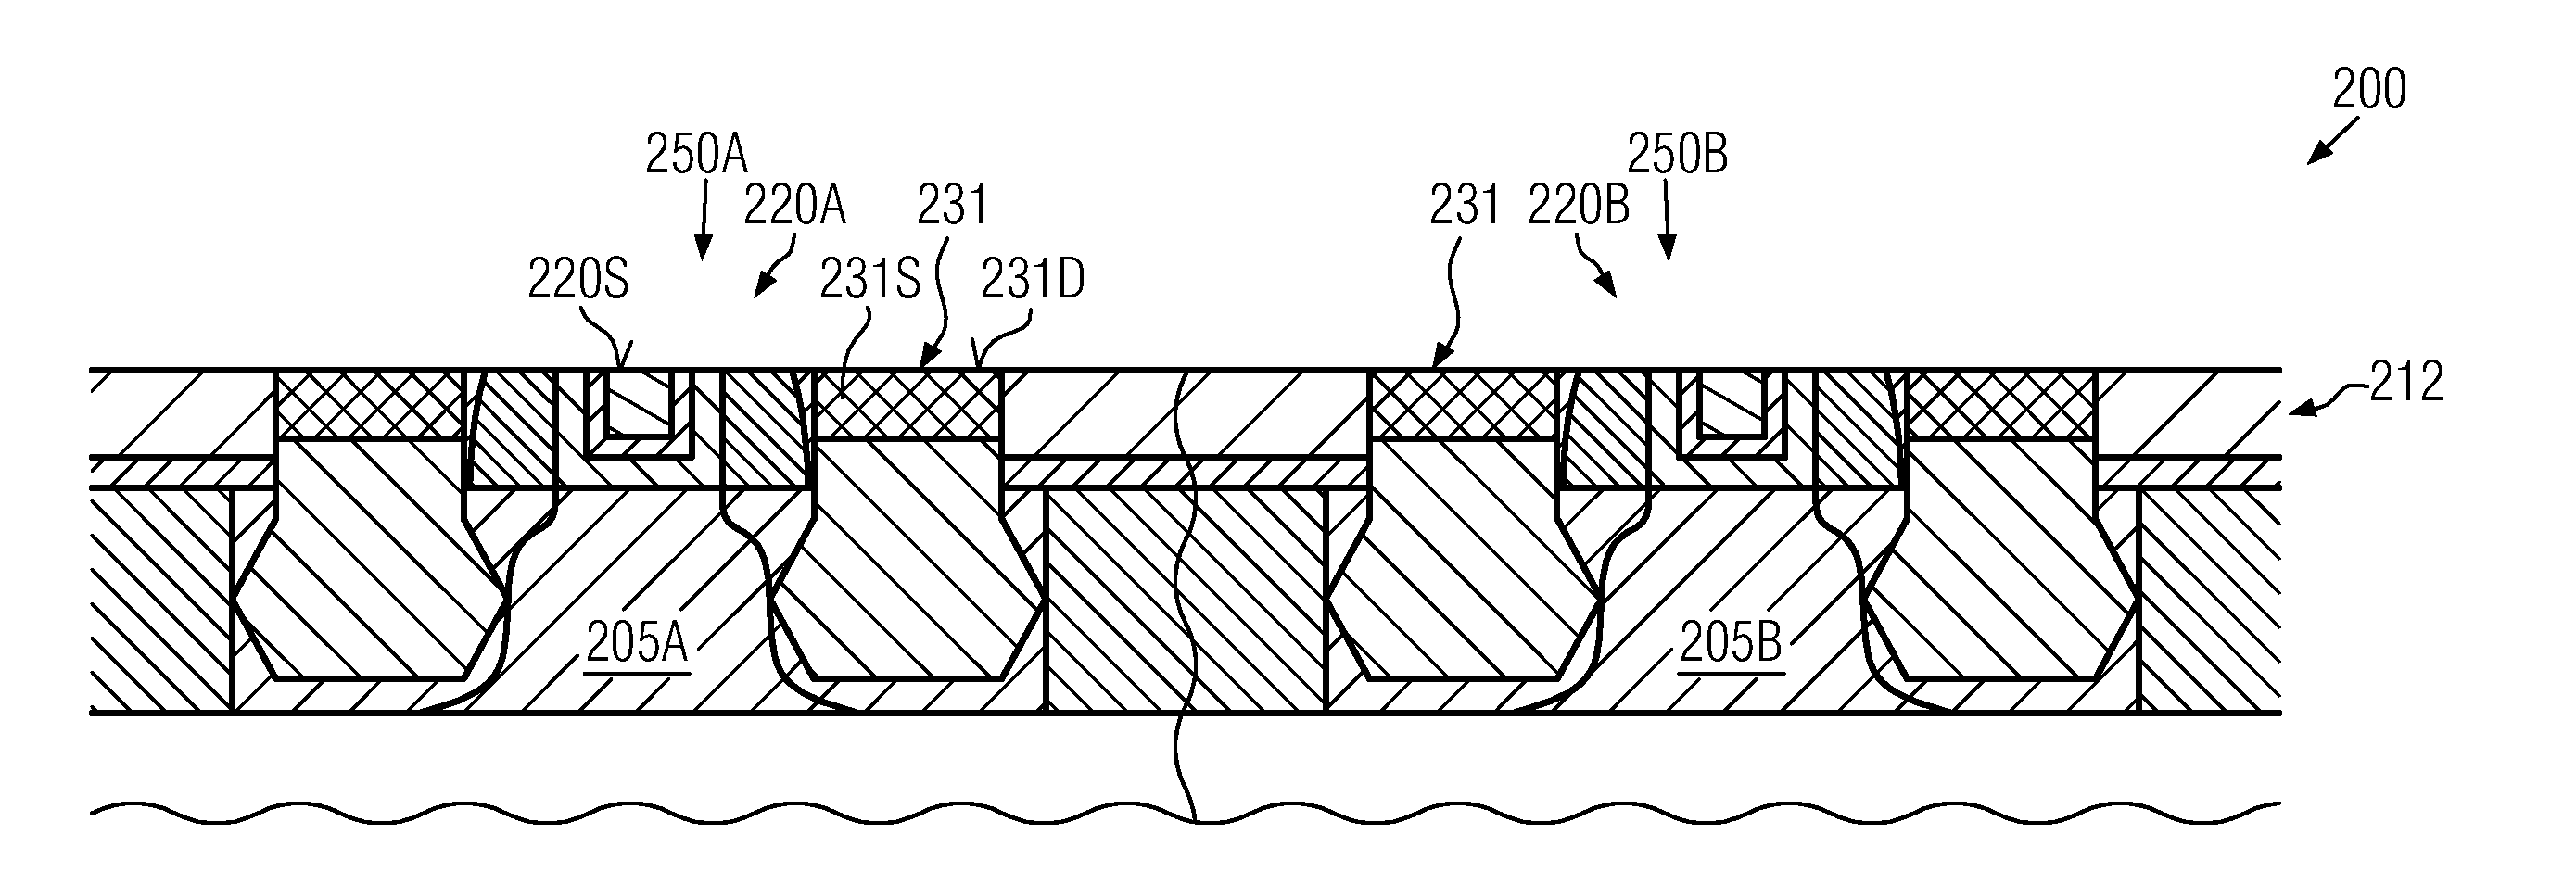 Transistors Comprising High-K Metal Gate Electrode Structures and Embedded Strain-Inducing Semiconductor Alloys Formed in a Late Stage